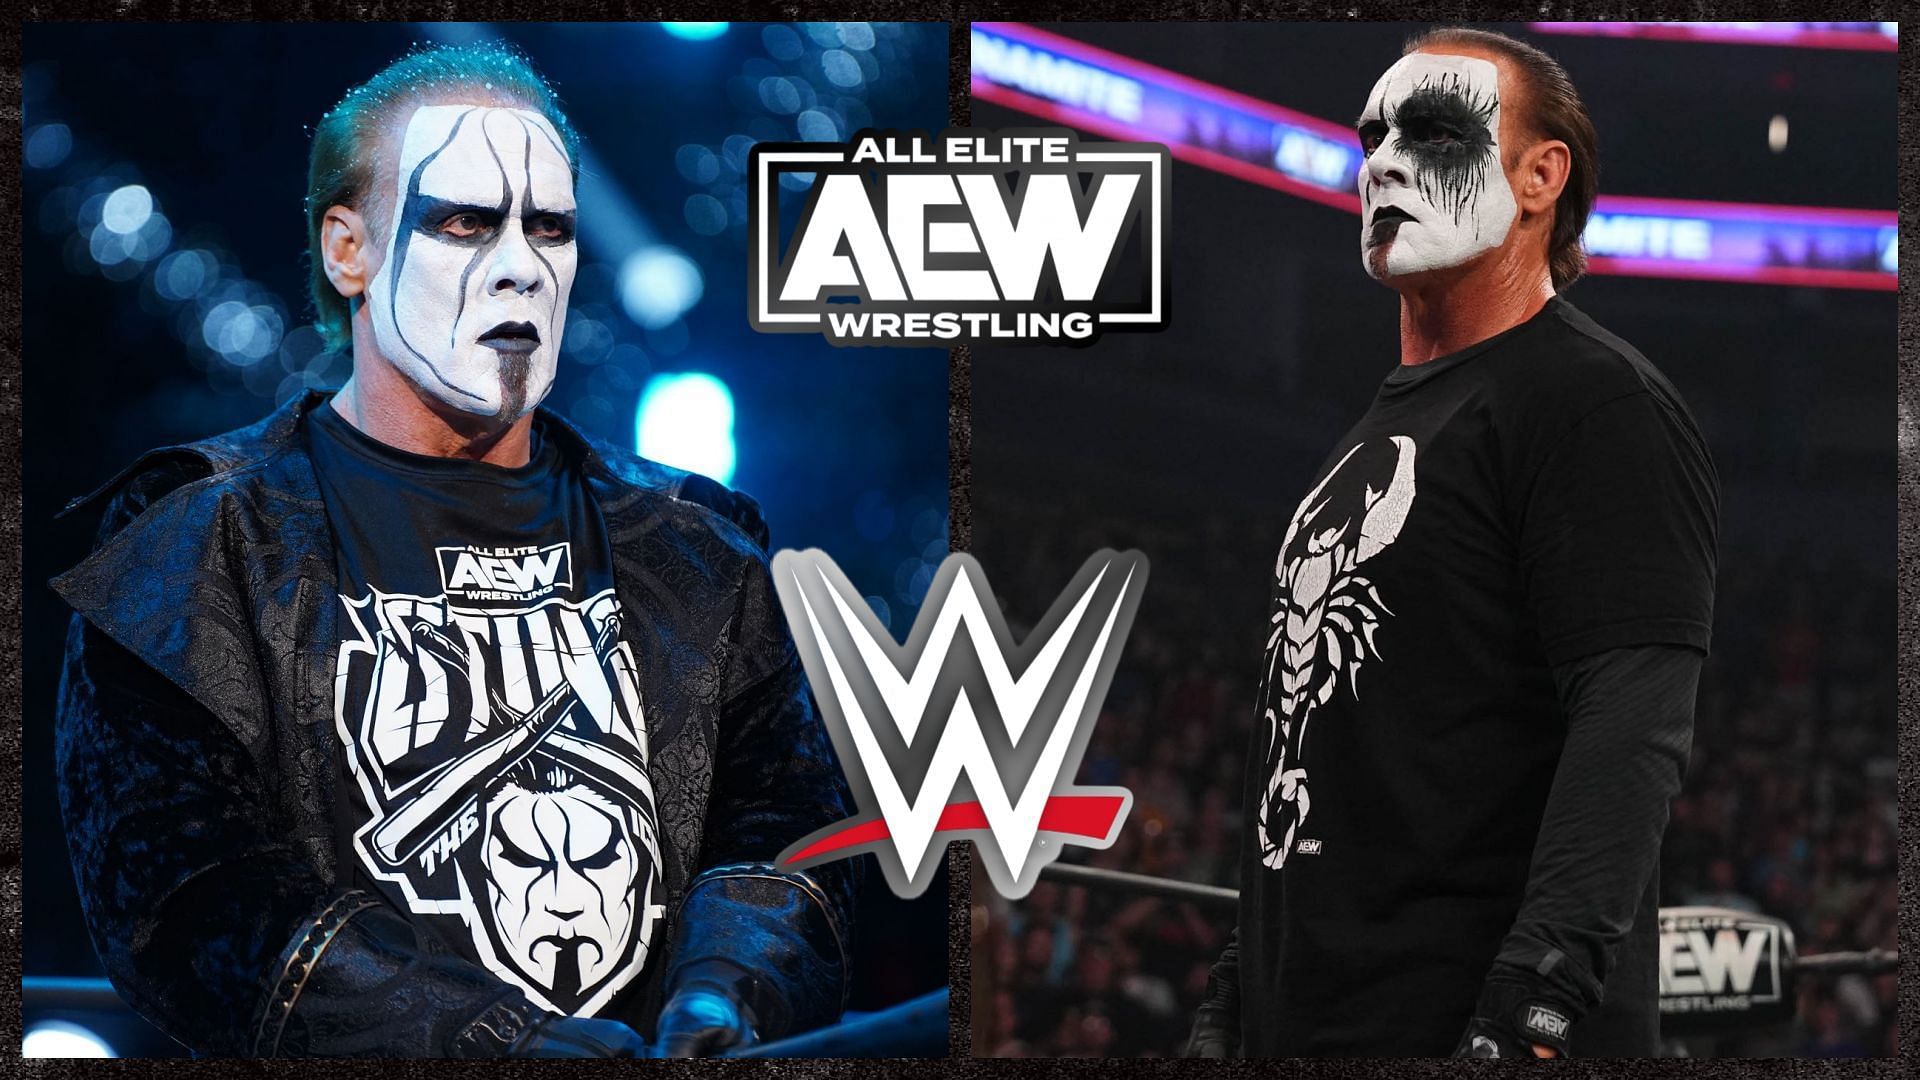 Tony Khan announces WWE Hall of Famer Sting's in-ring AEW return after 4 months